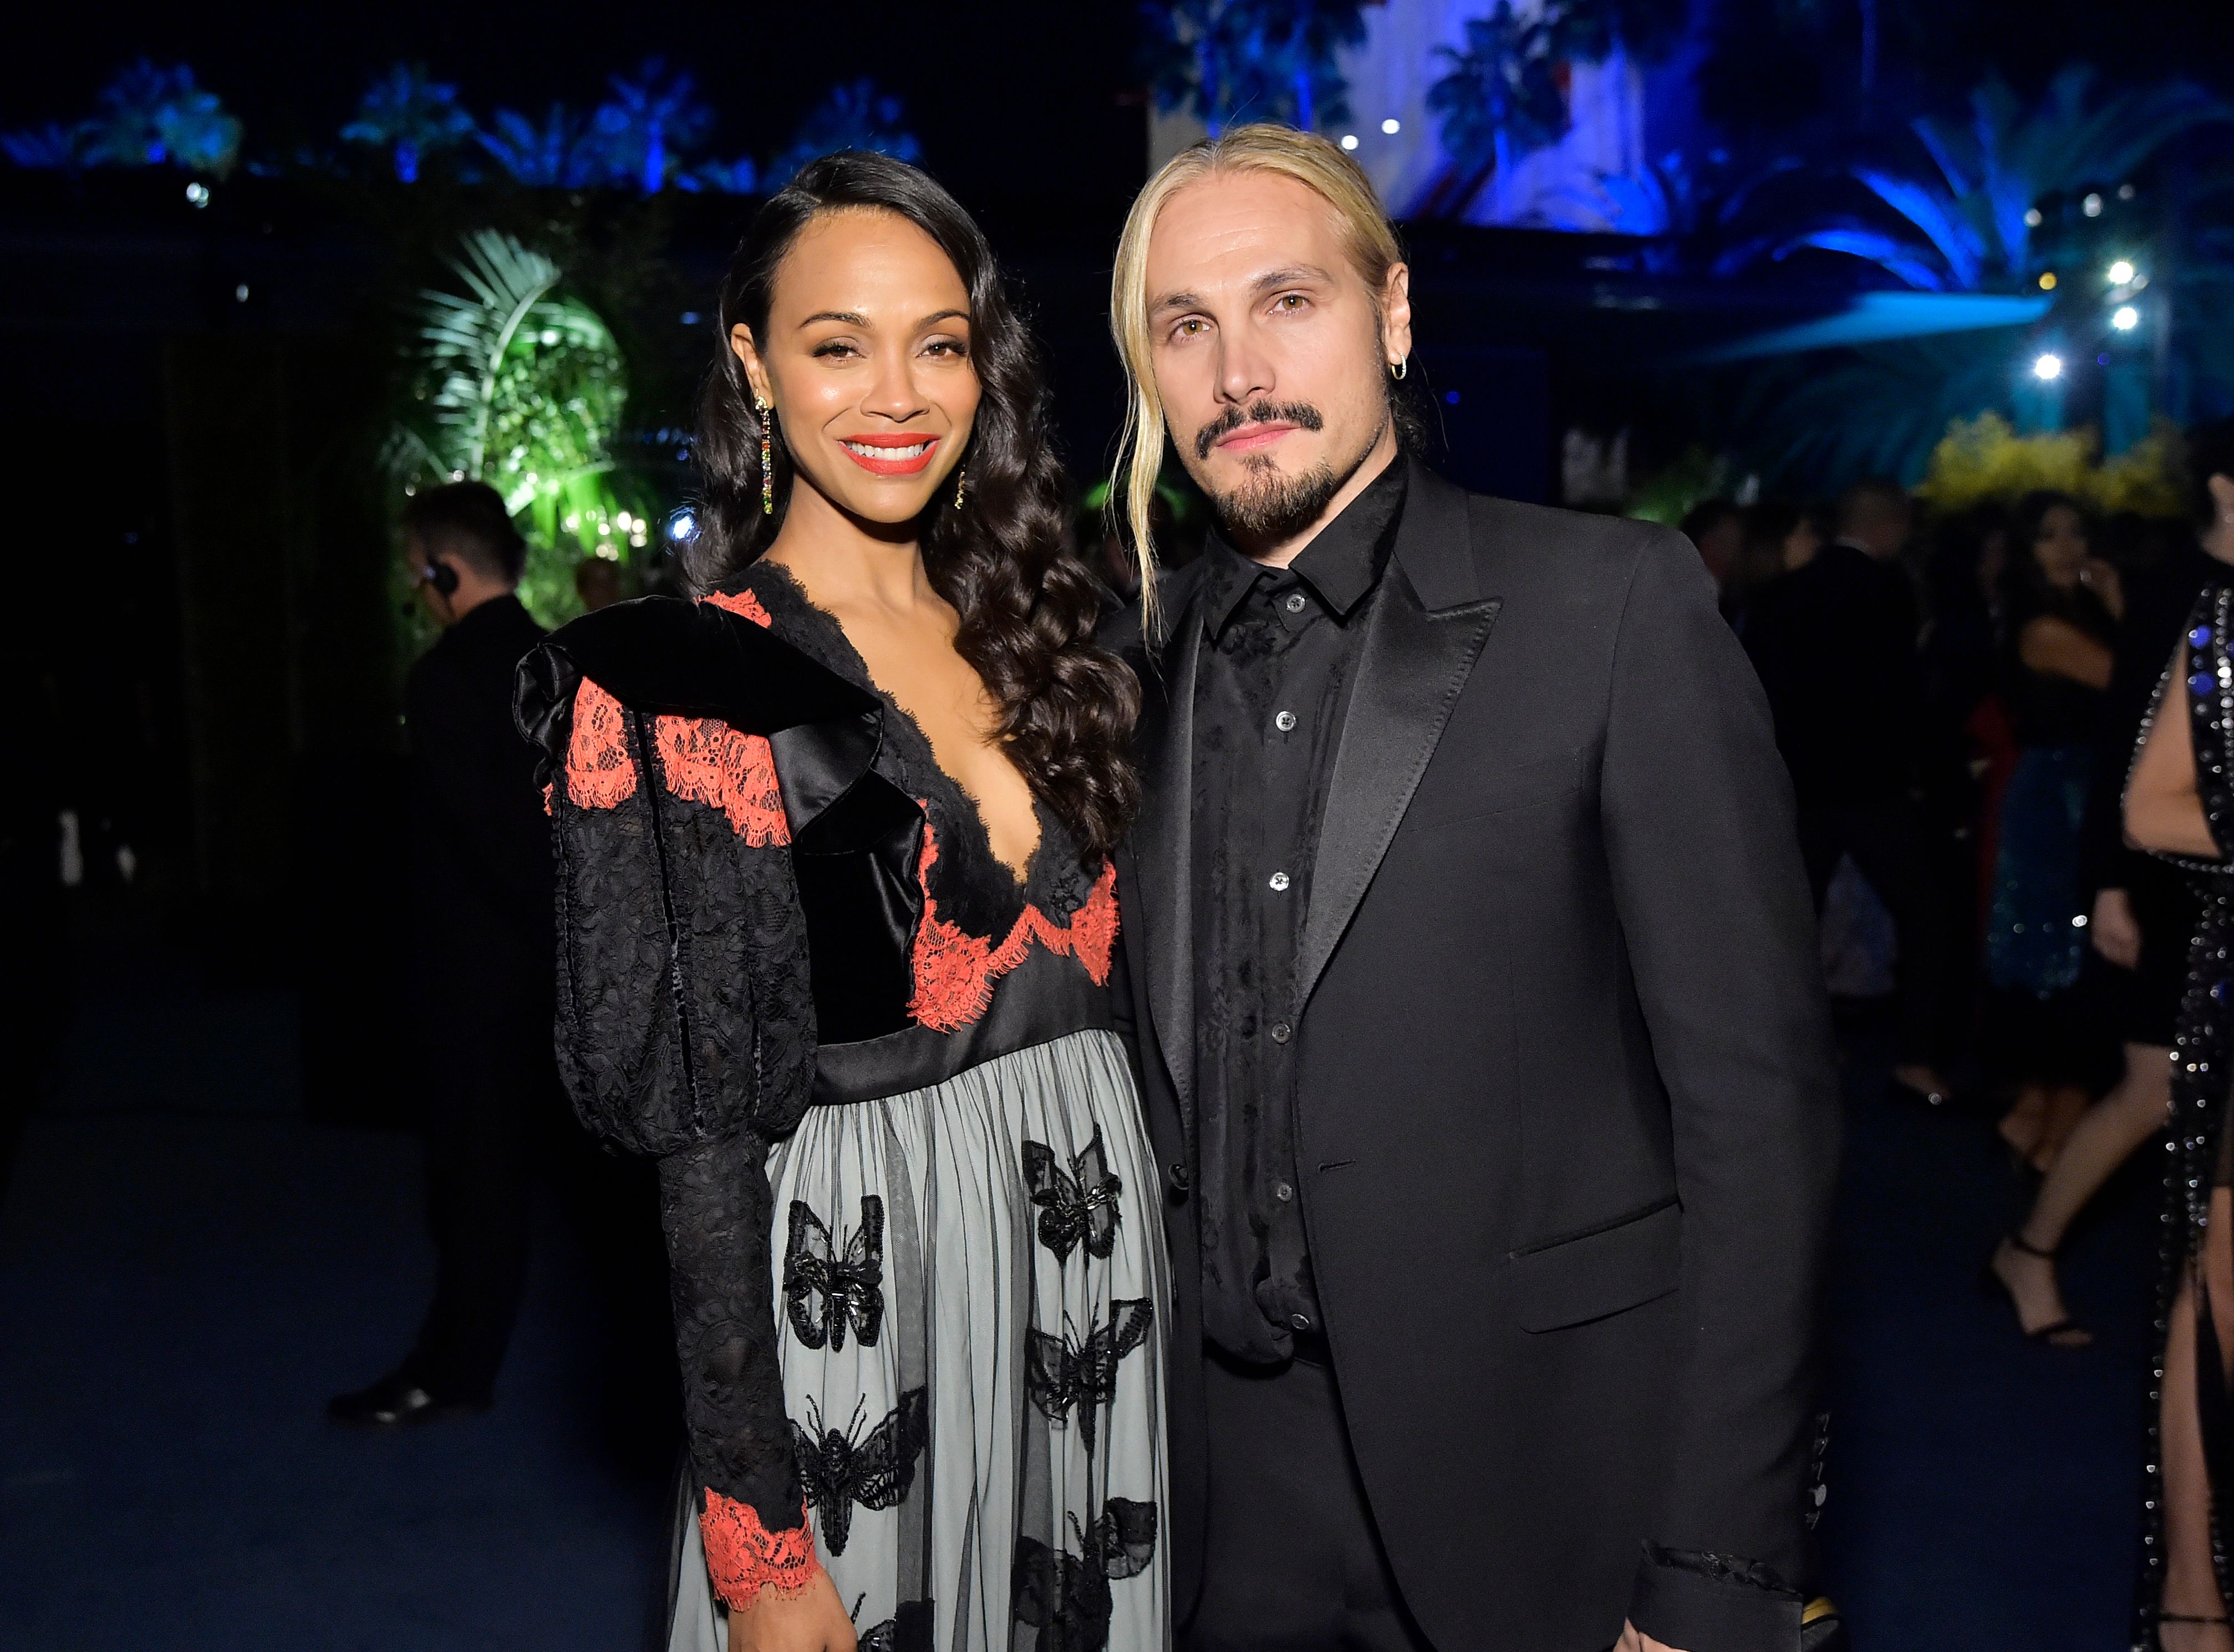 Zoe Saldana and Marco Perego at the 2019 LACMA Art + Film Gala Presented By Gucci at LACMA on November 02, 2019 | Photo: Getty Images